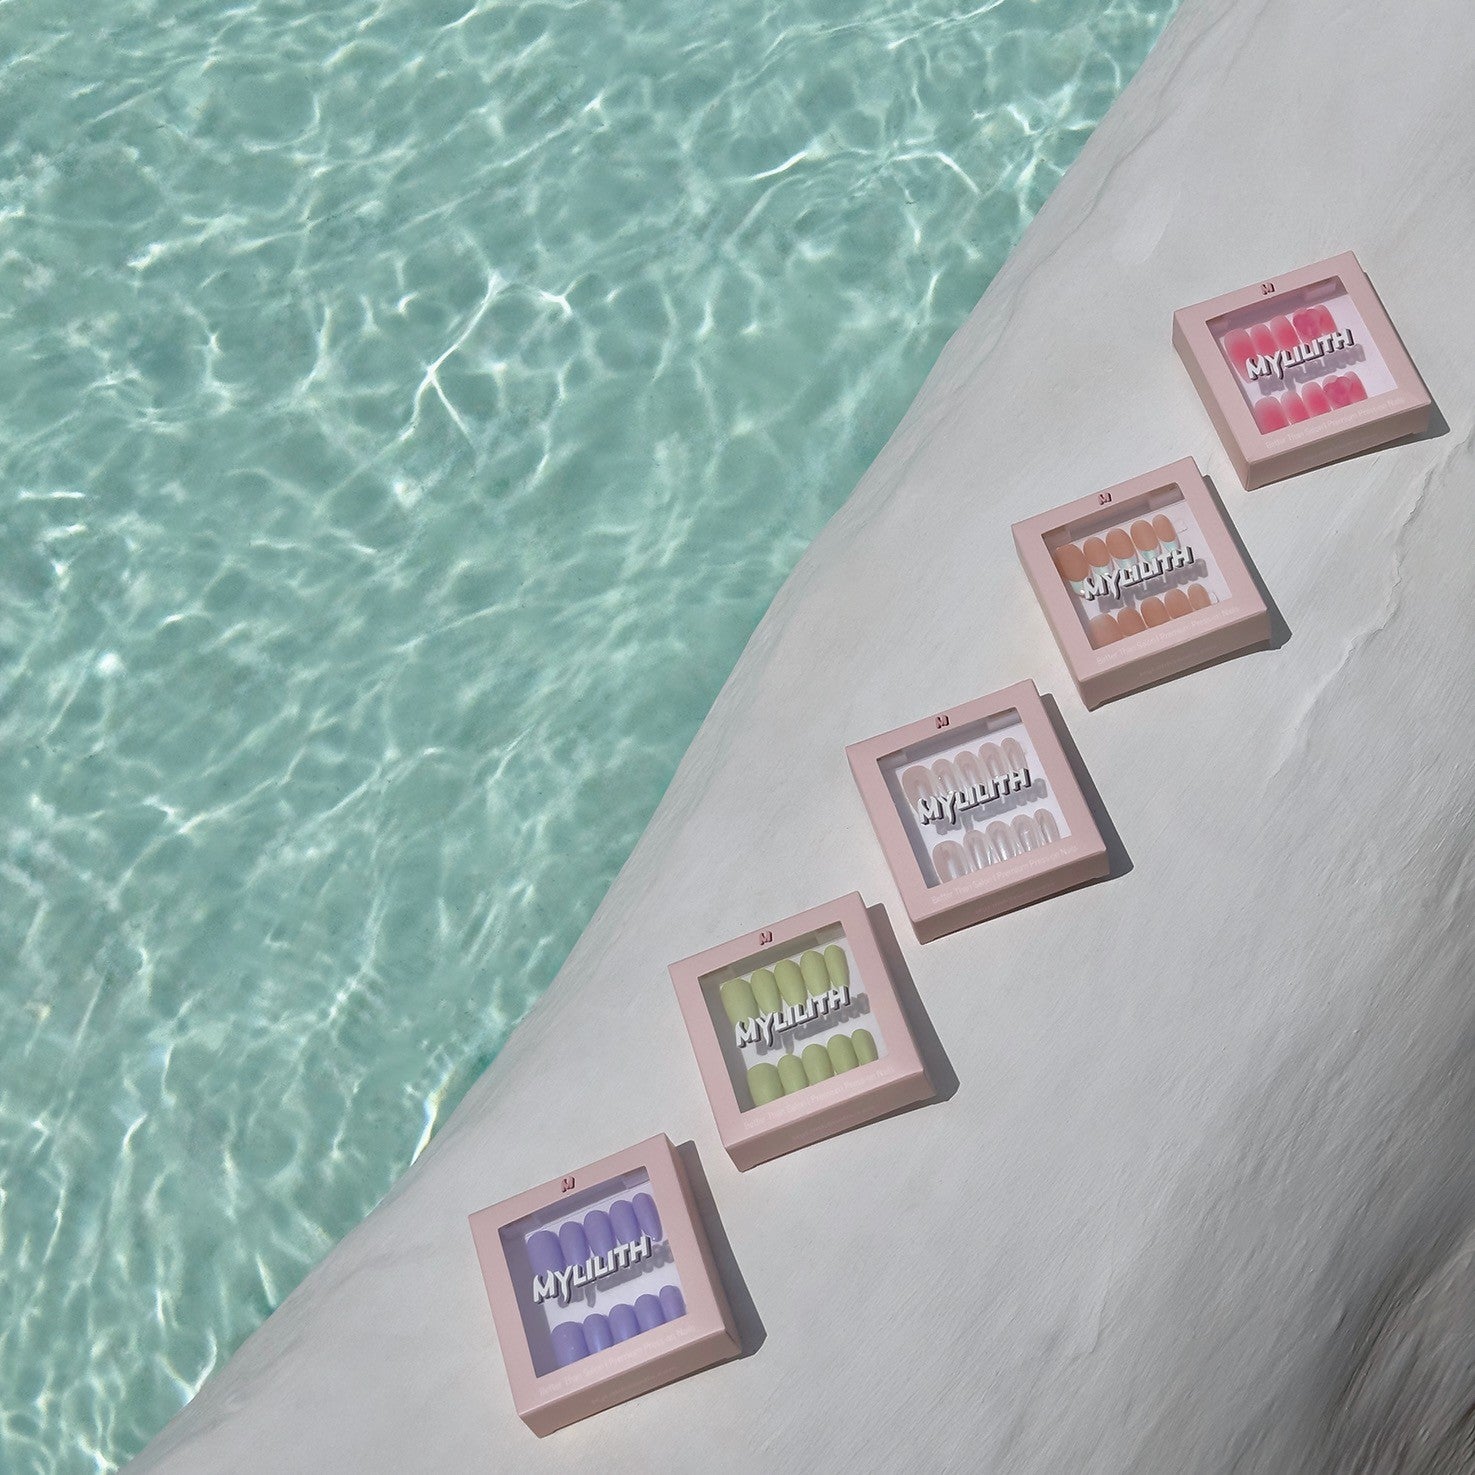 Five boxes of MyLilith Studio’s summer collection press-on nails displayed on a white surface beside a clear turquoise pool, showcasing different nail designs in pastel colours.